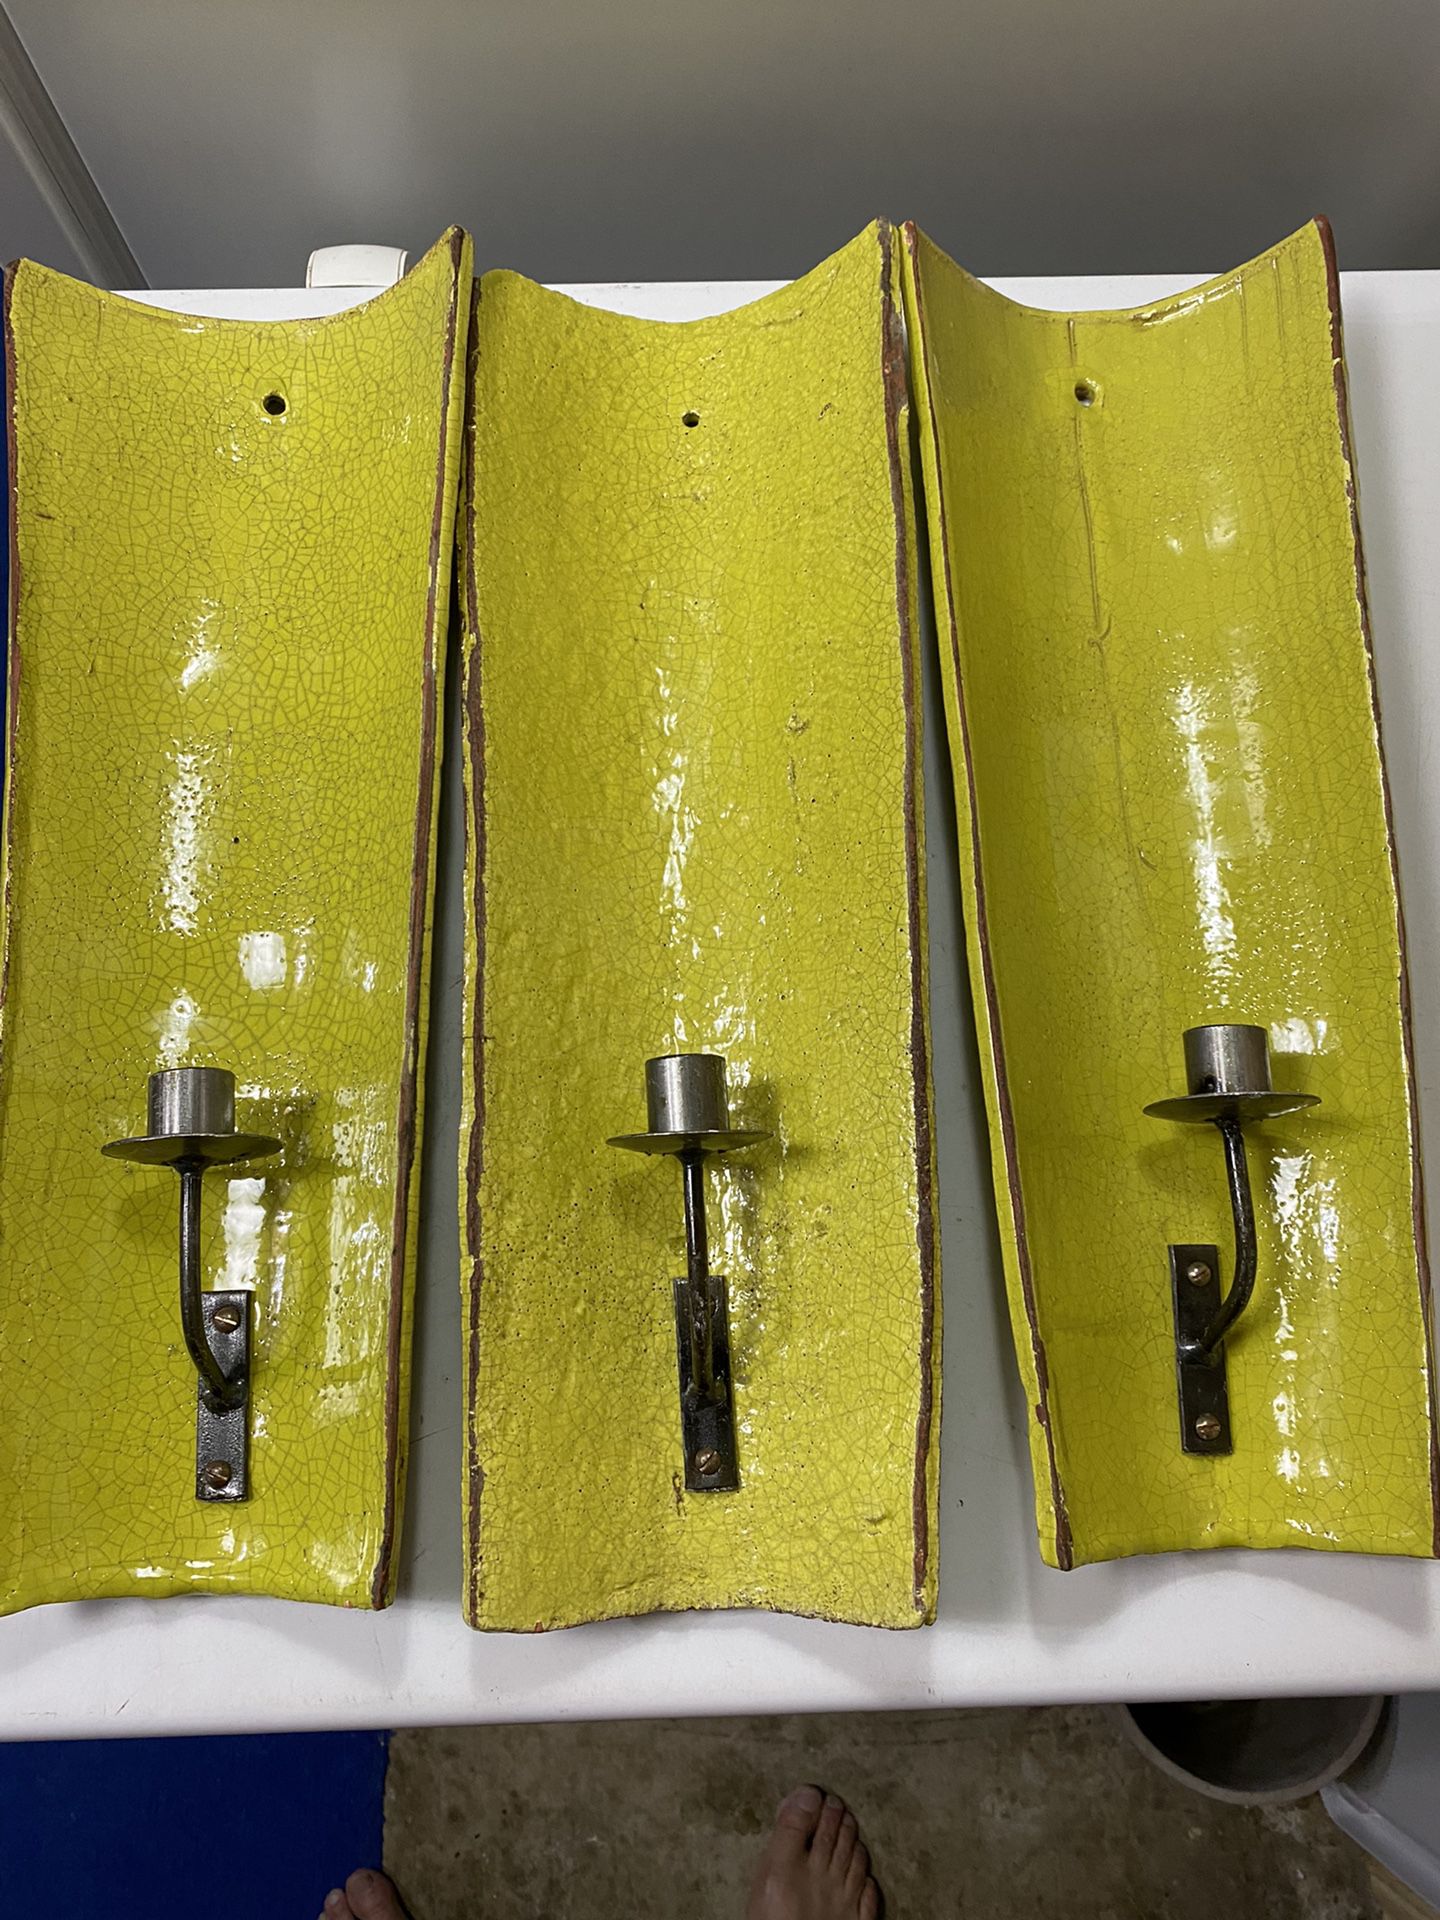 Amazing set of (3) wall hanging ceramic glazed candle holders. Avocado/lime color.